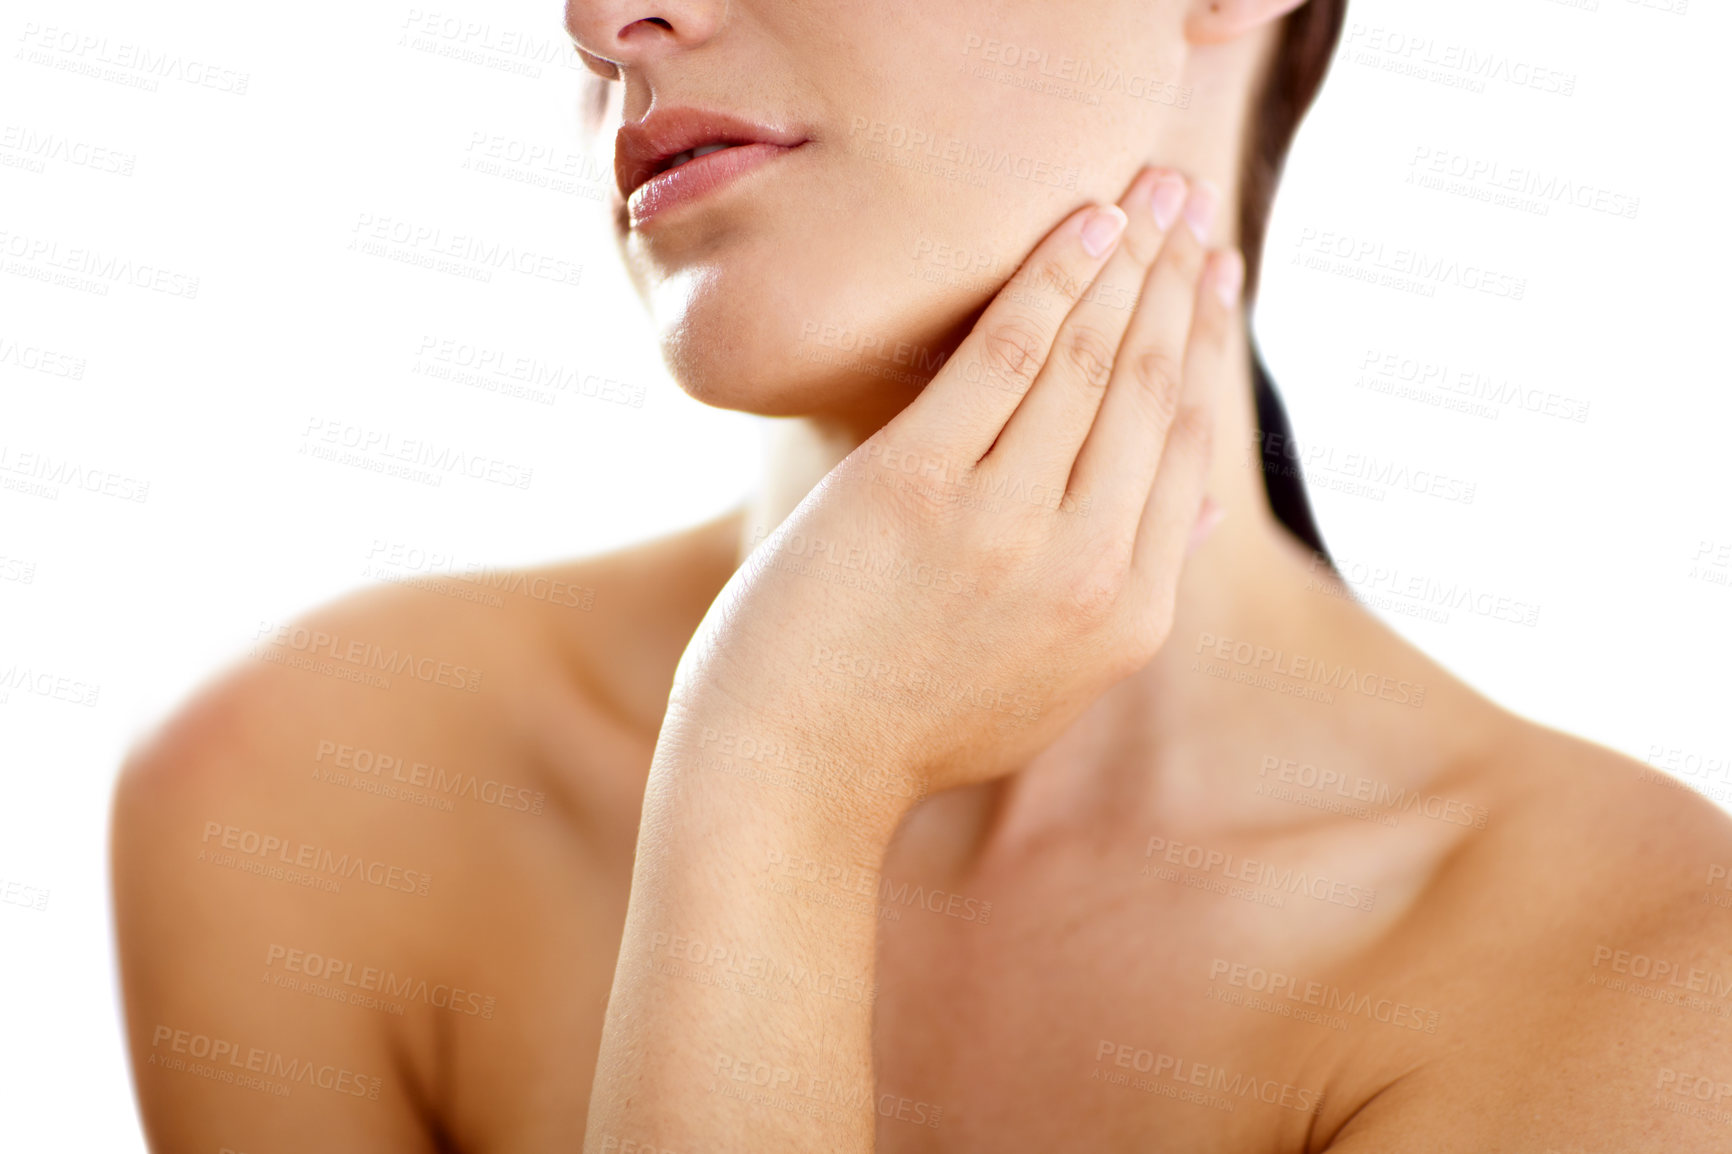 Buy stock photo Cropped image of a young woman with her hand on her neck